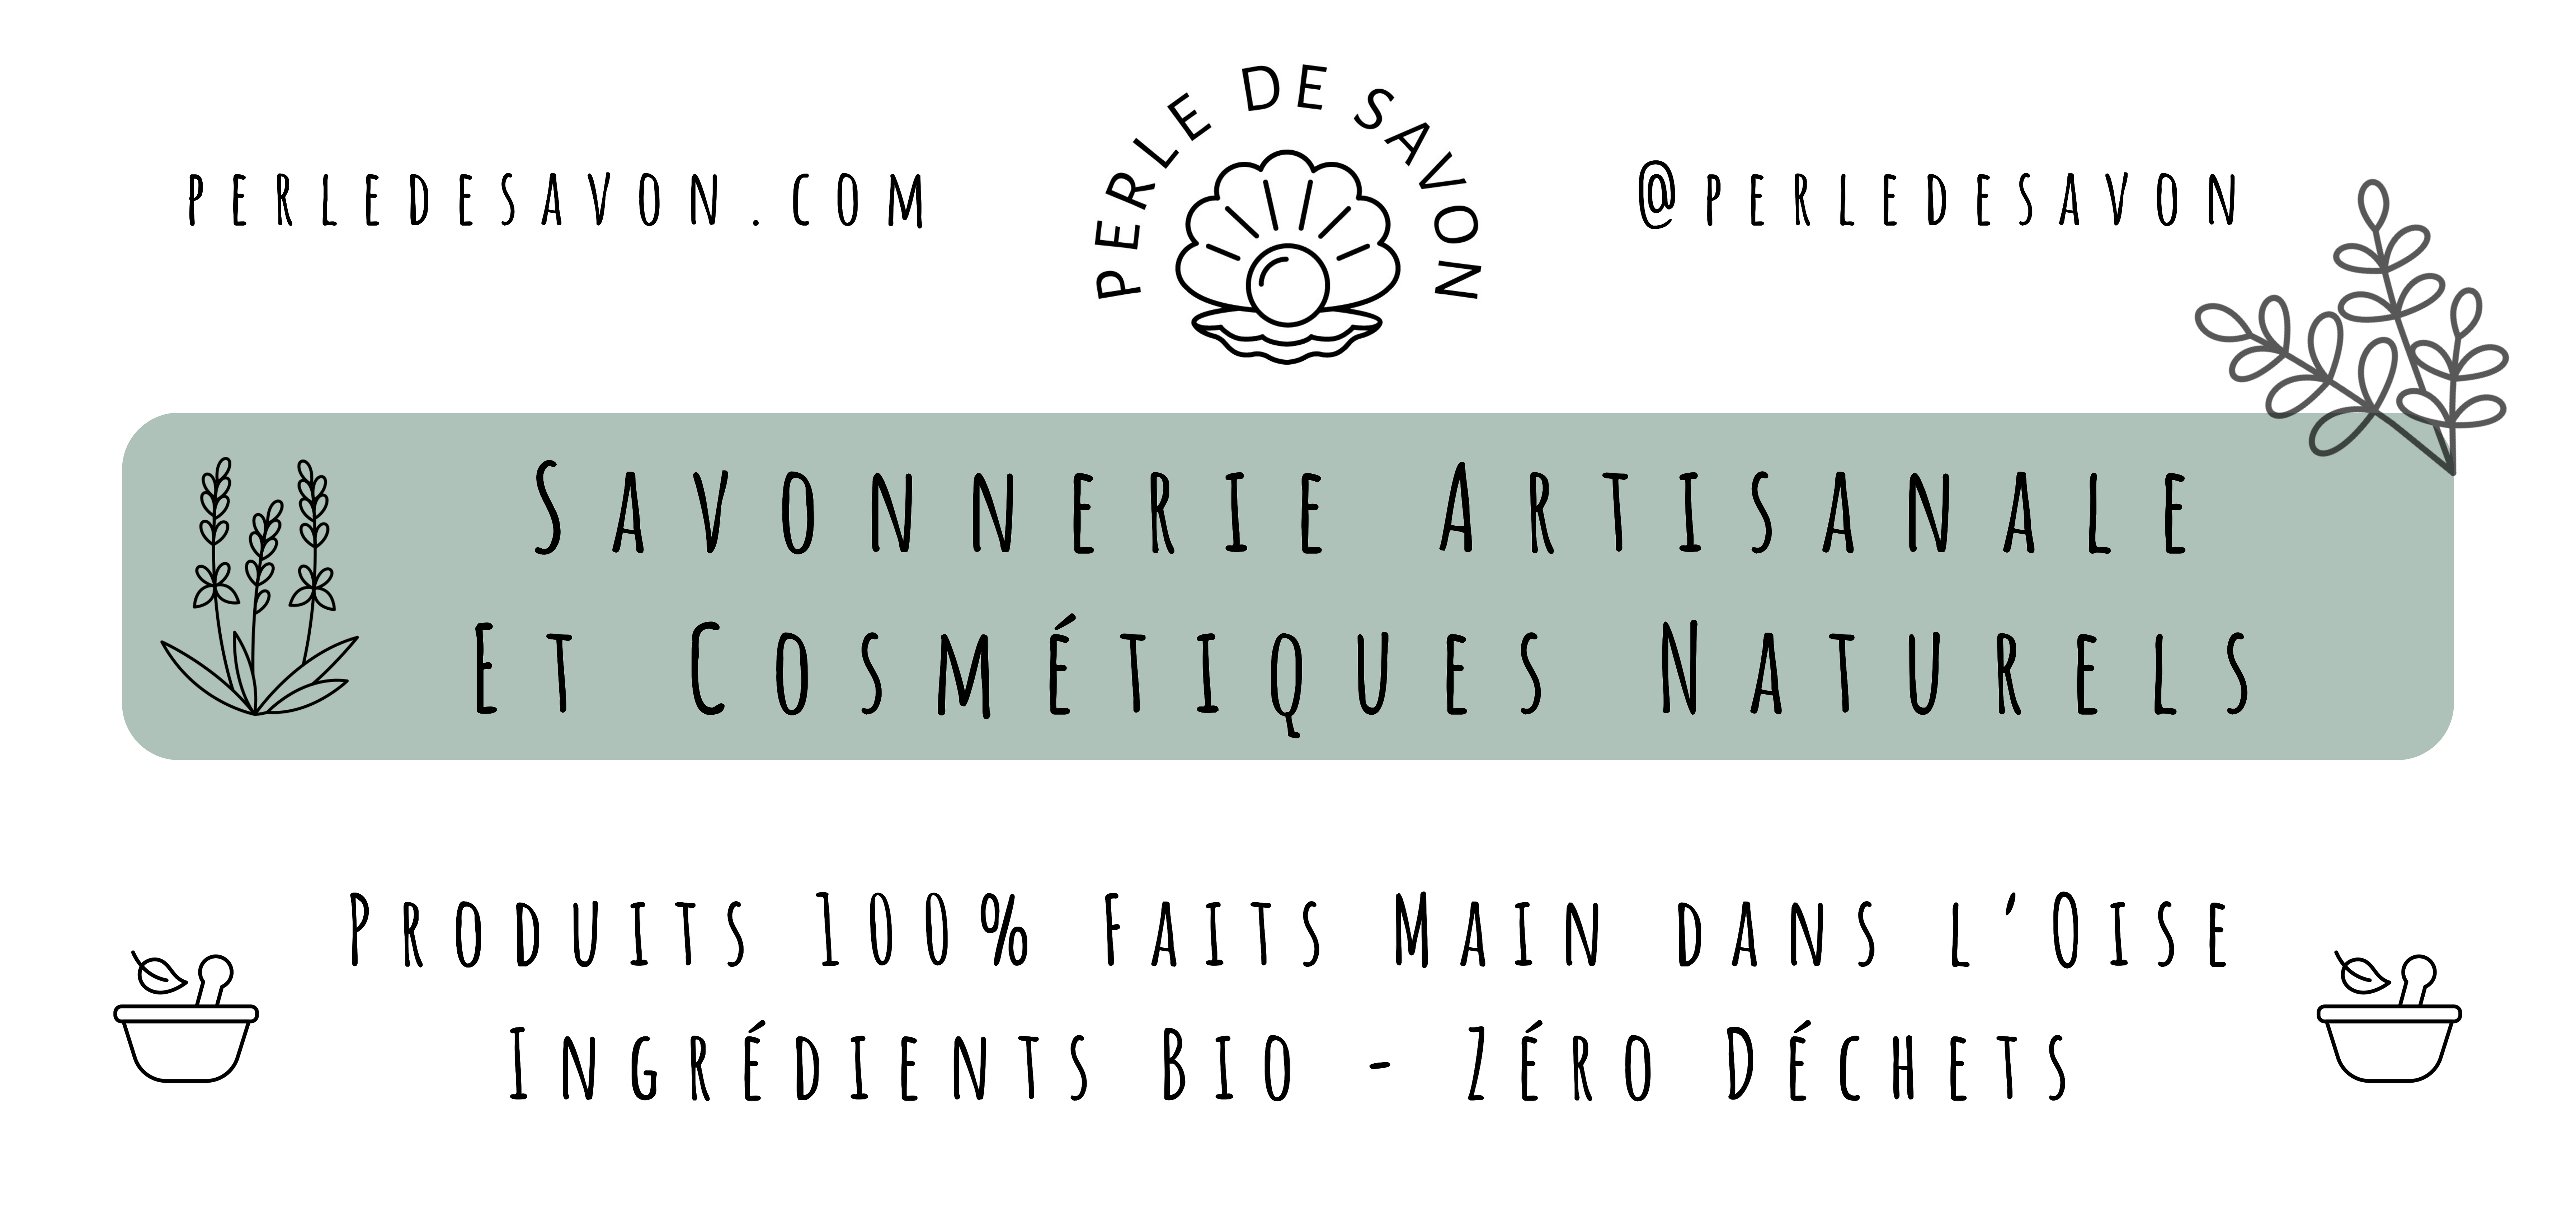 Perle de Savon : Savonnerie Artisanale & Cosmétiques naturels null France null null null null